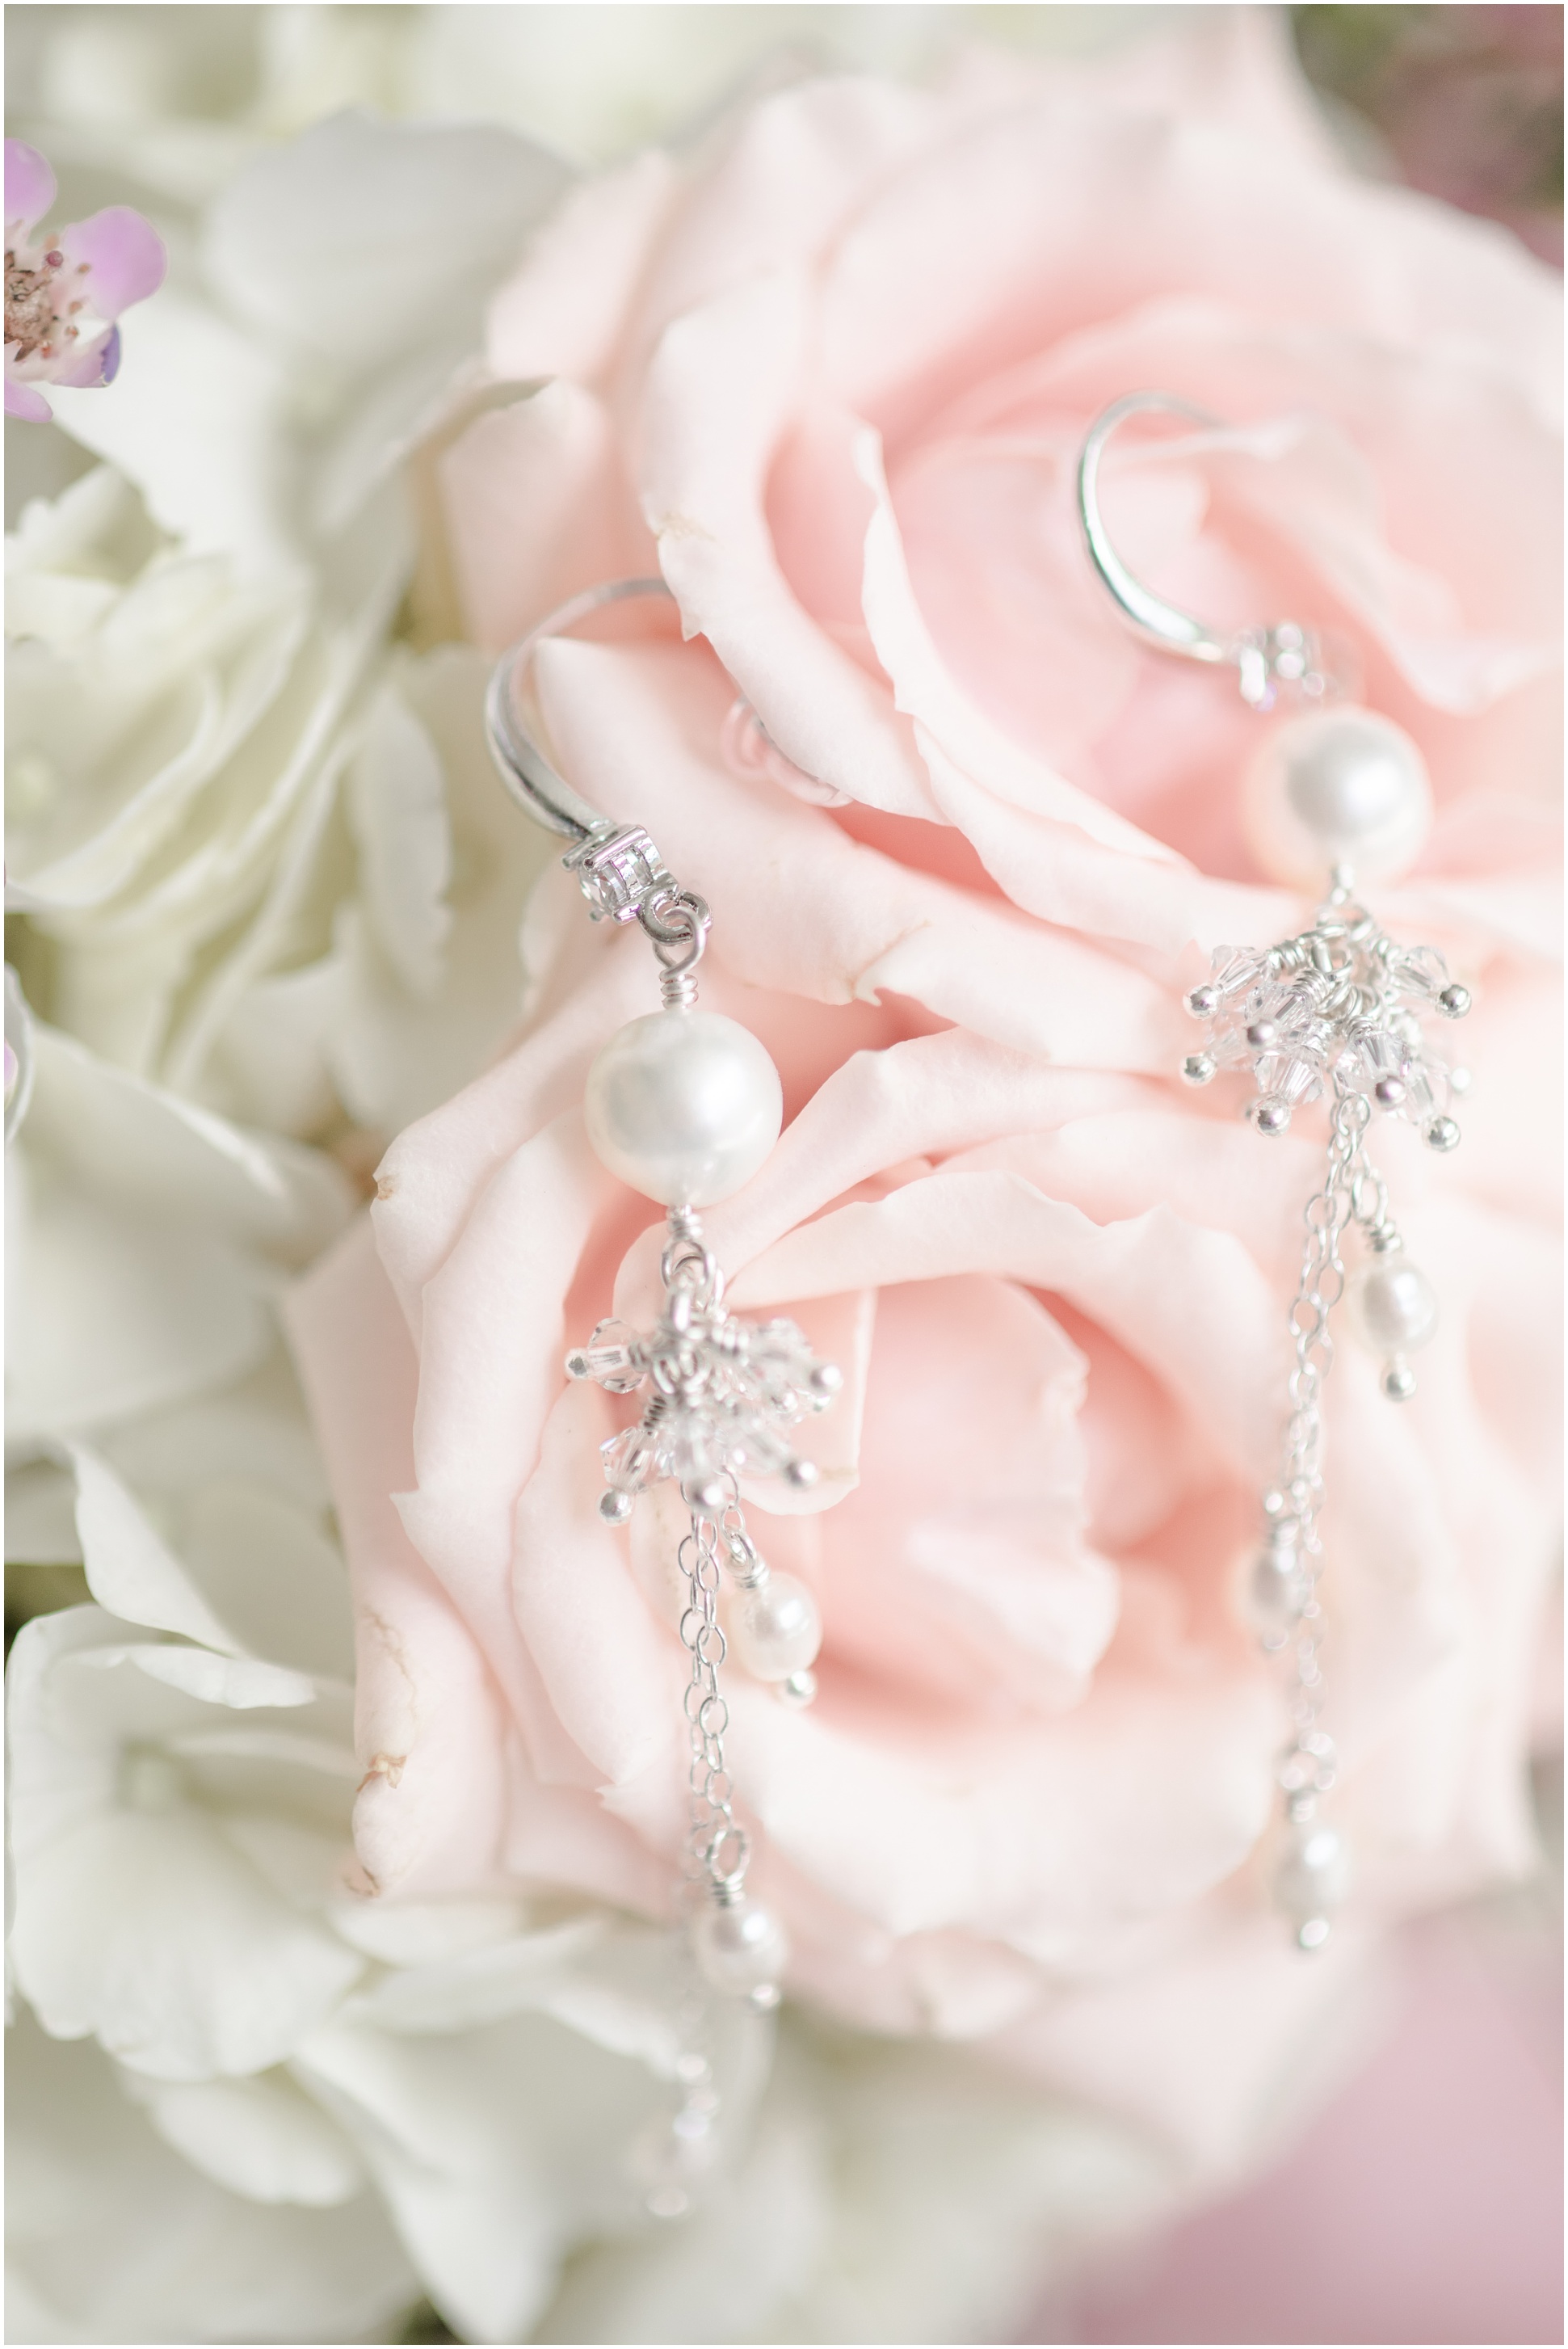 Dangling earrings hanging from blush roses